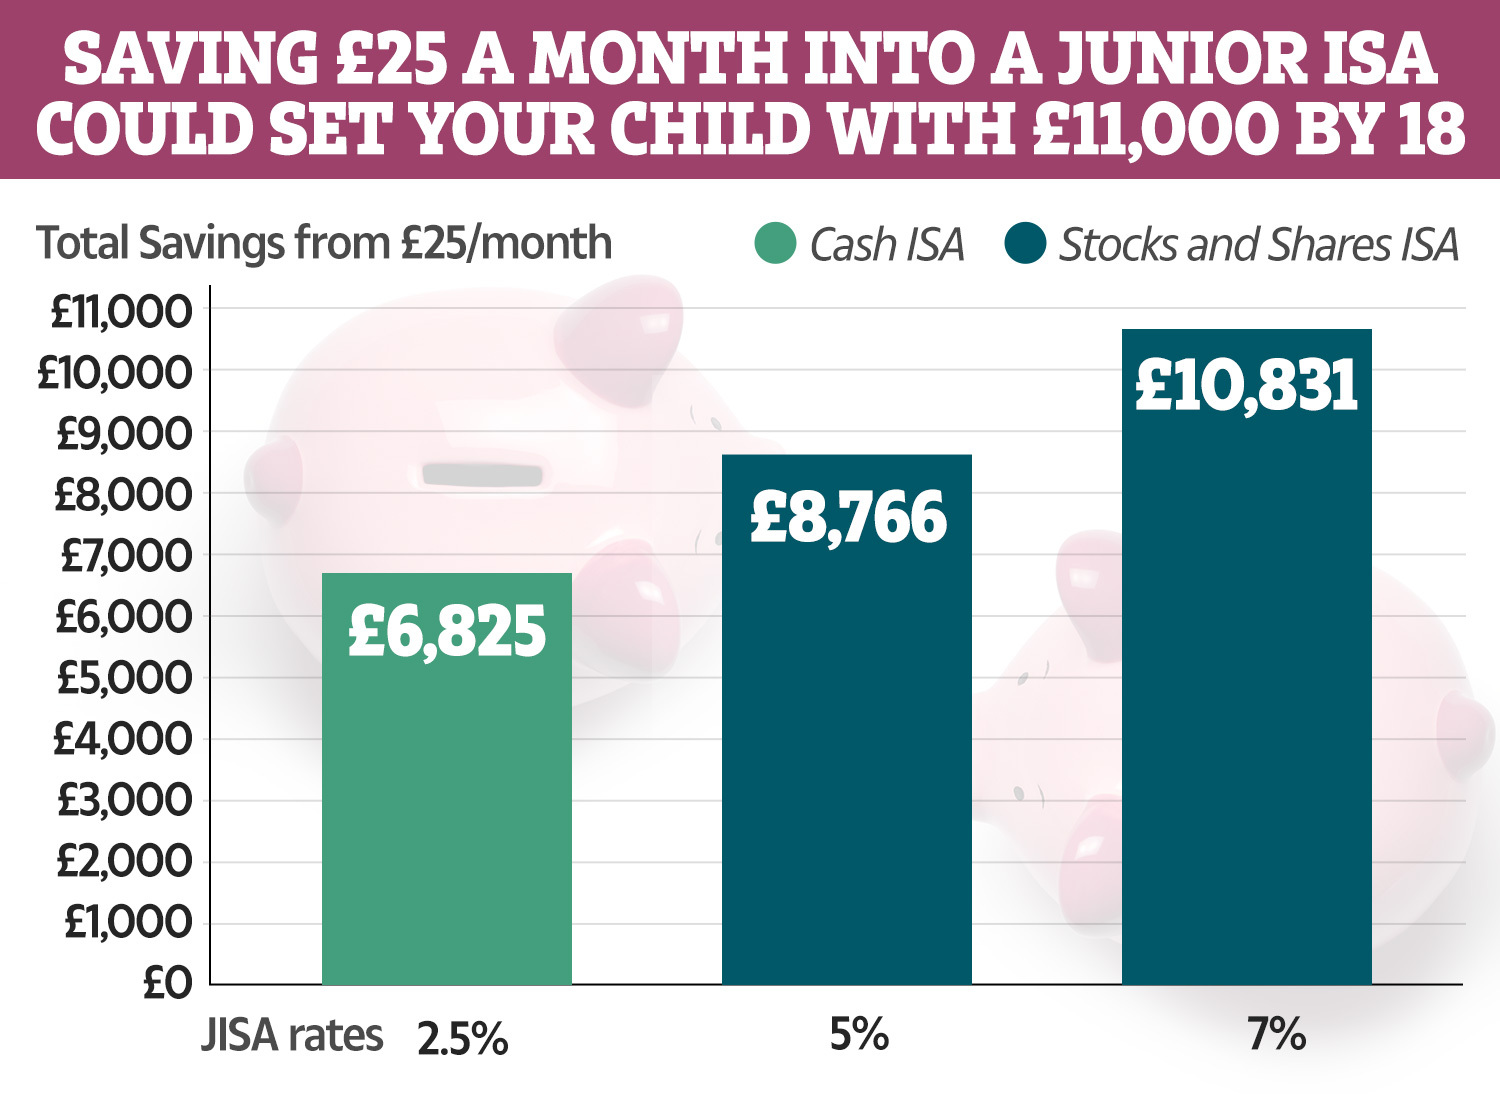 Hardgreaves Landsown say you could save nearly £7,000 from £25 a month in a cash JISA alone